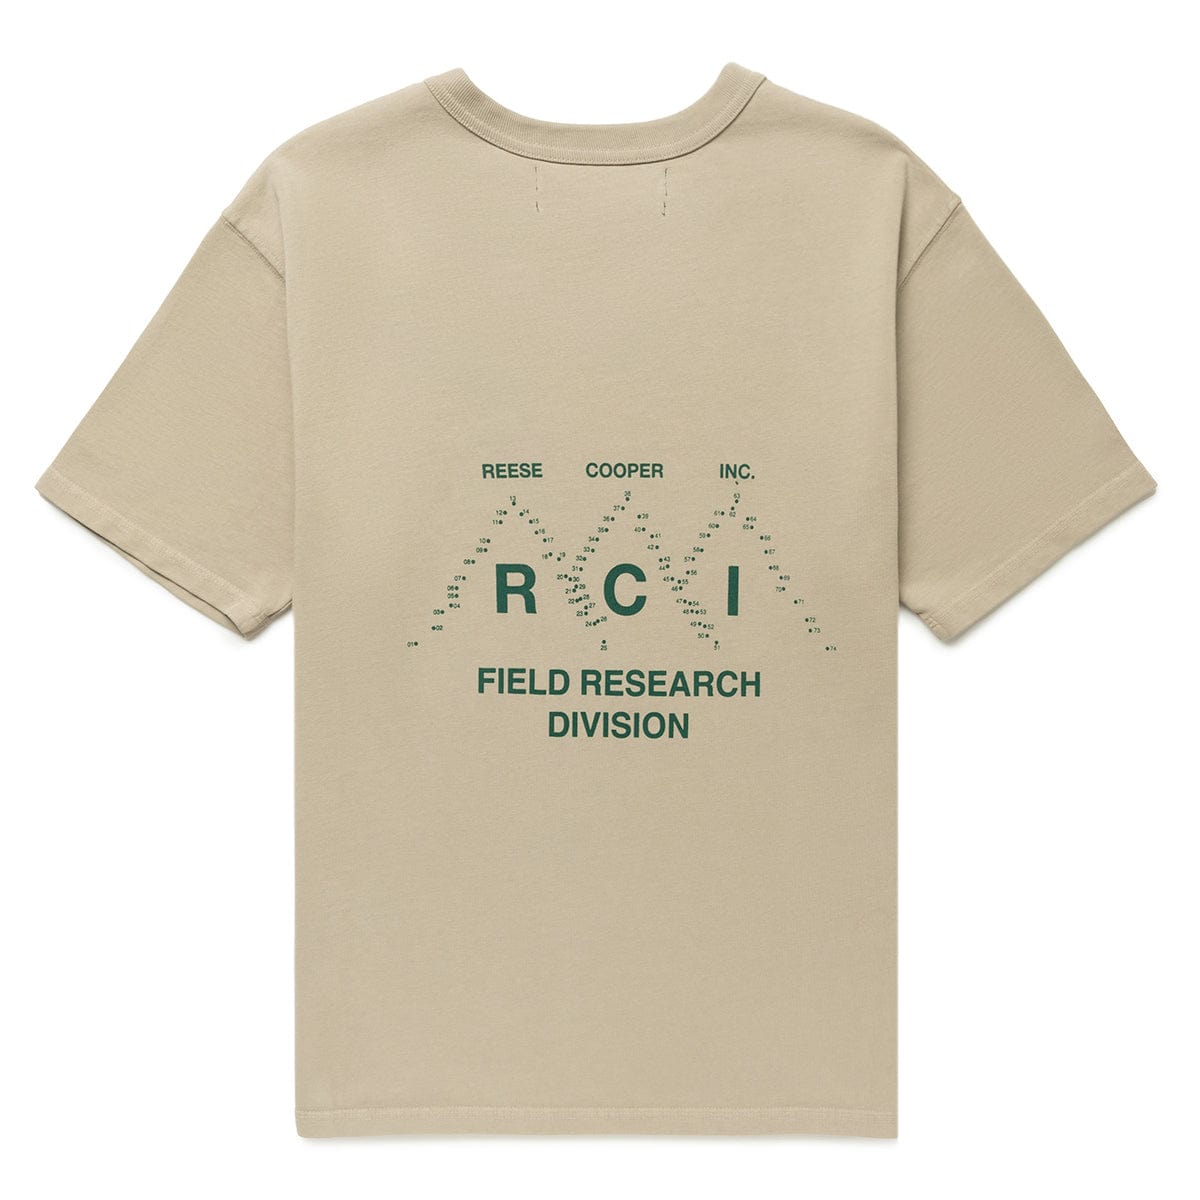 Reese Cooper T-Shirts FIELD RESEARCH DIVISION T-SHIRT